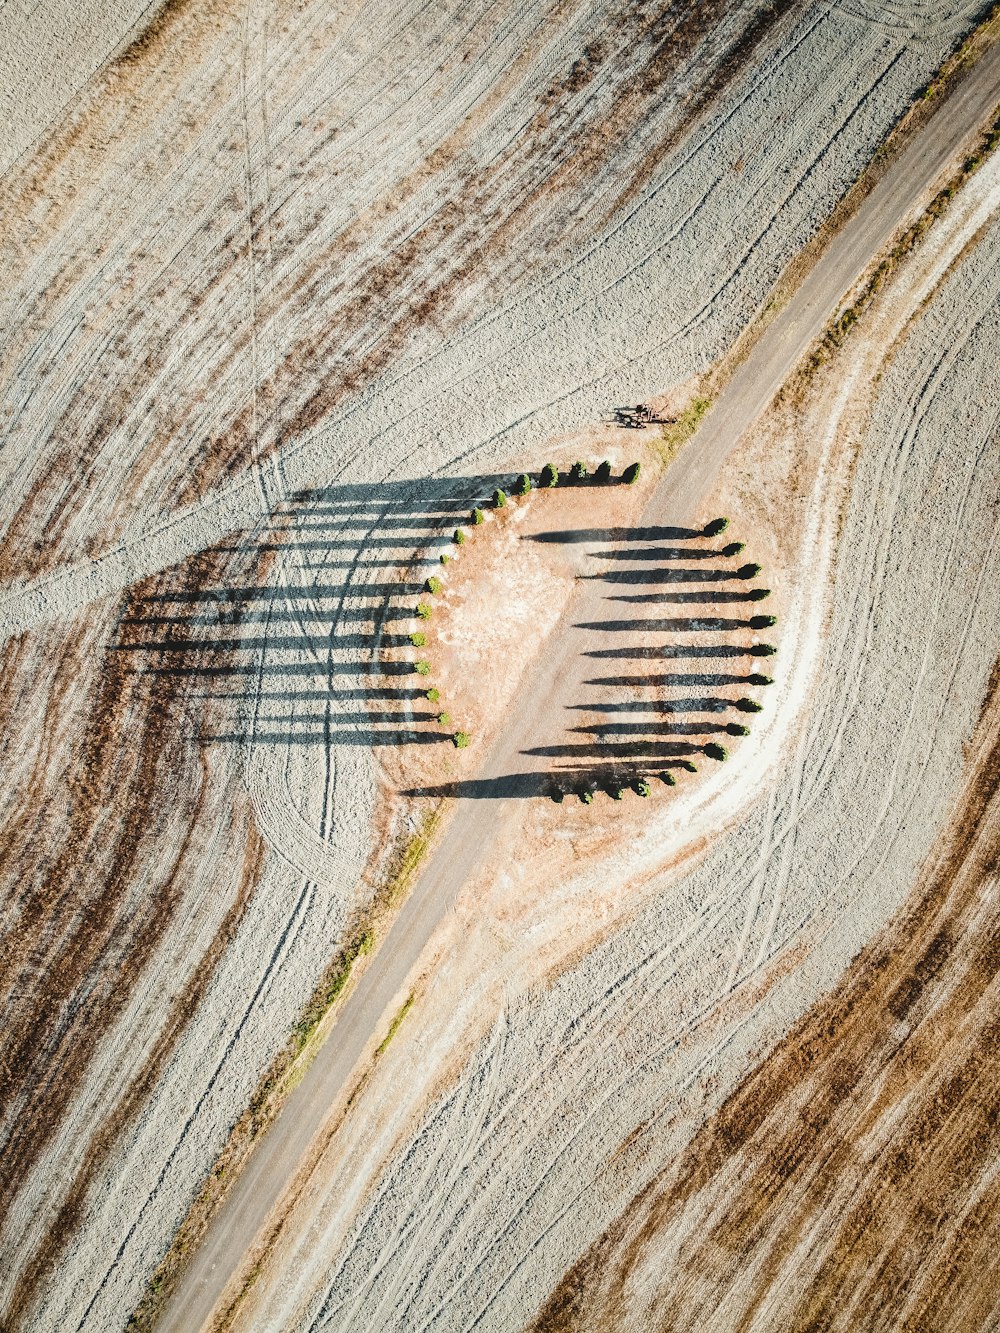 an aerial view of a dirt field with trees